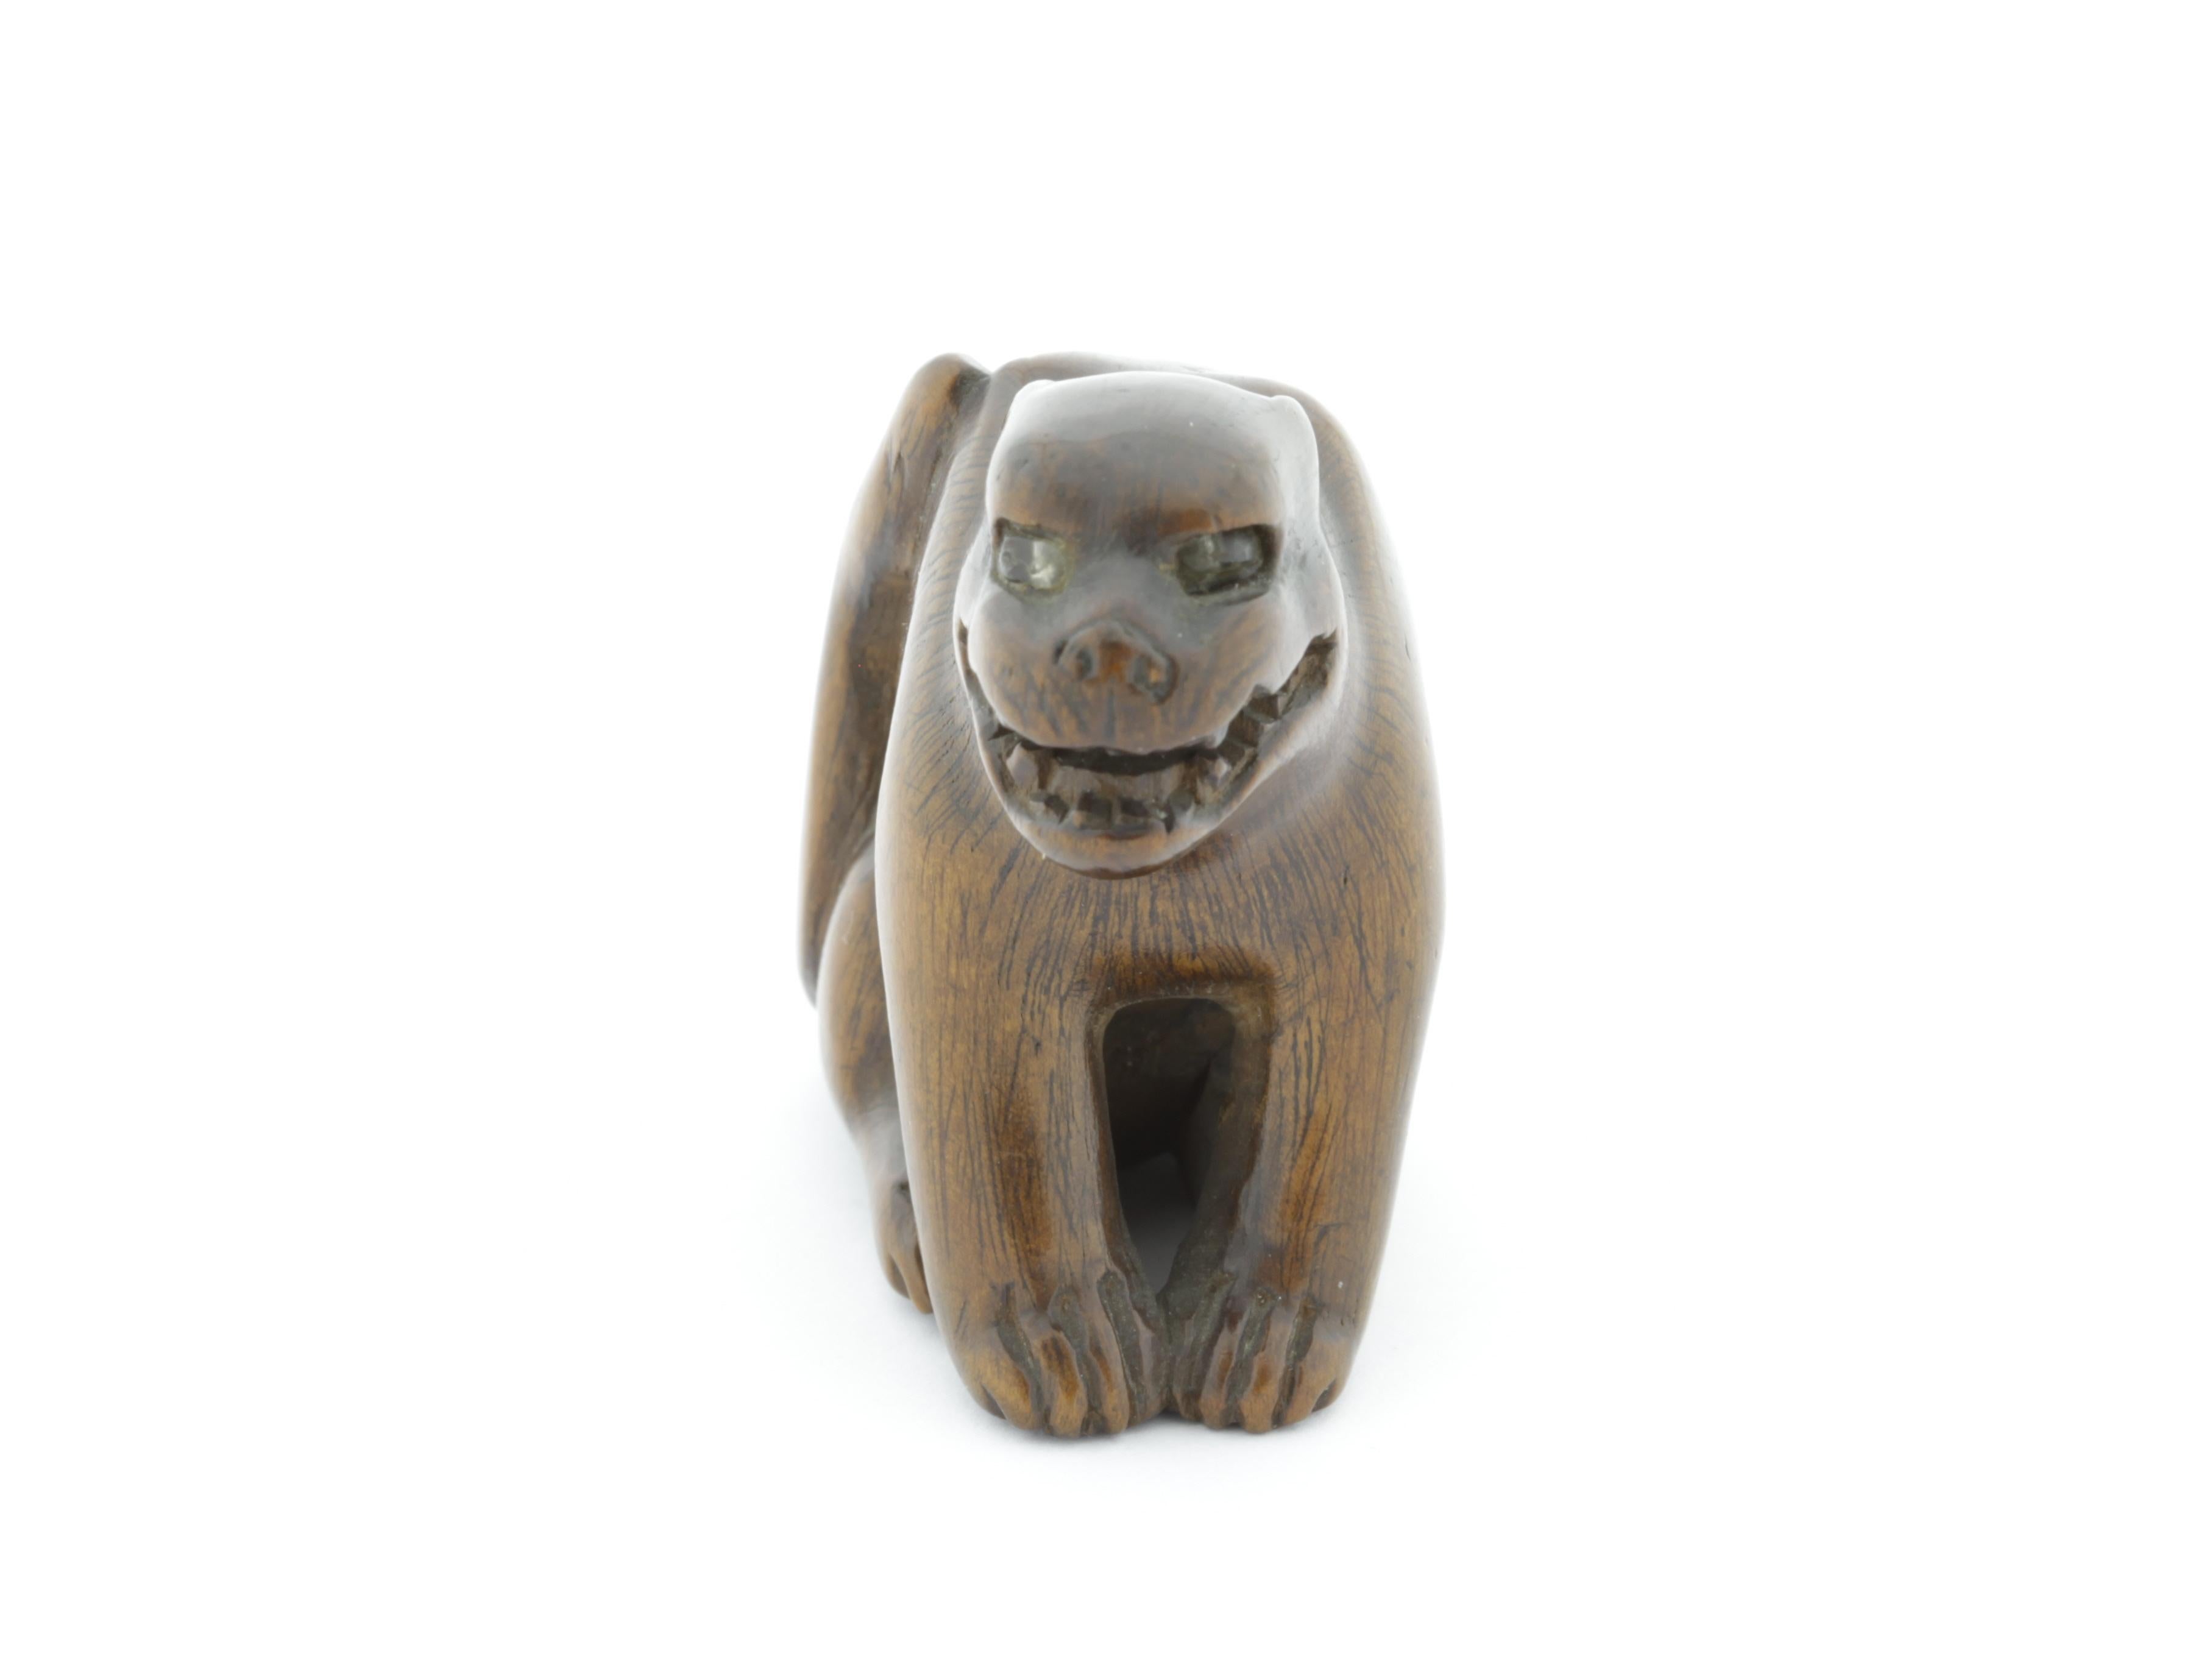  Netsuke, Wood, Accessory, Fashion, 19th Century Antique Woodcraft Dog - Other Art Style Art by Unknown